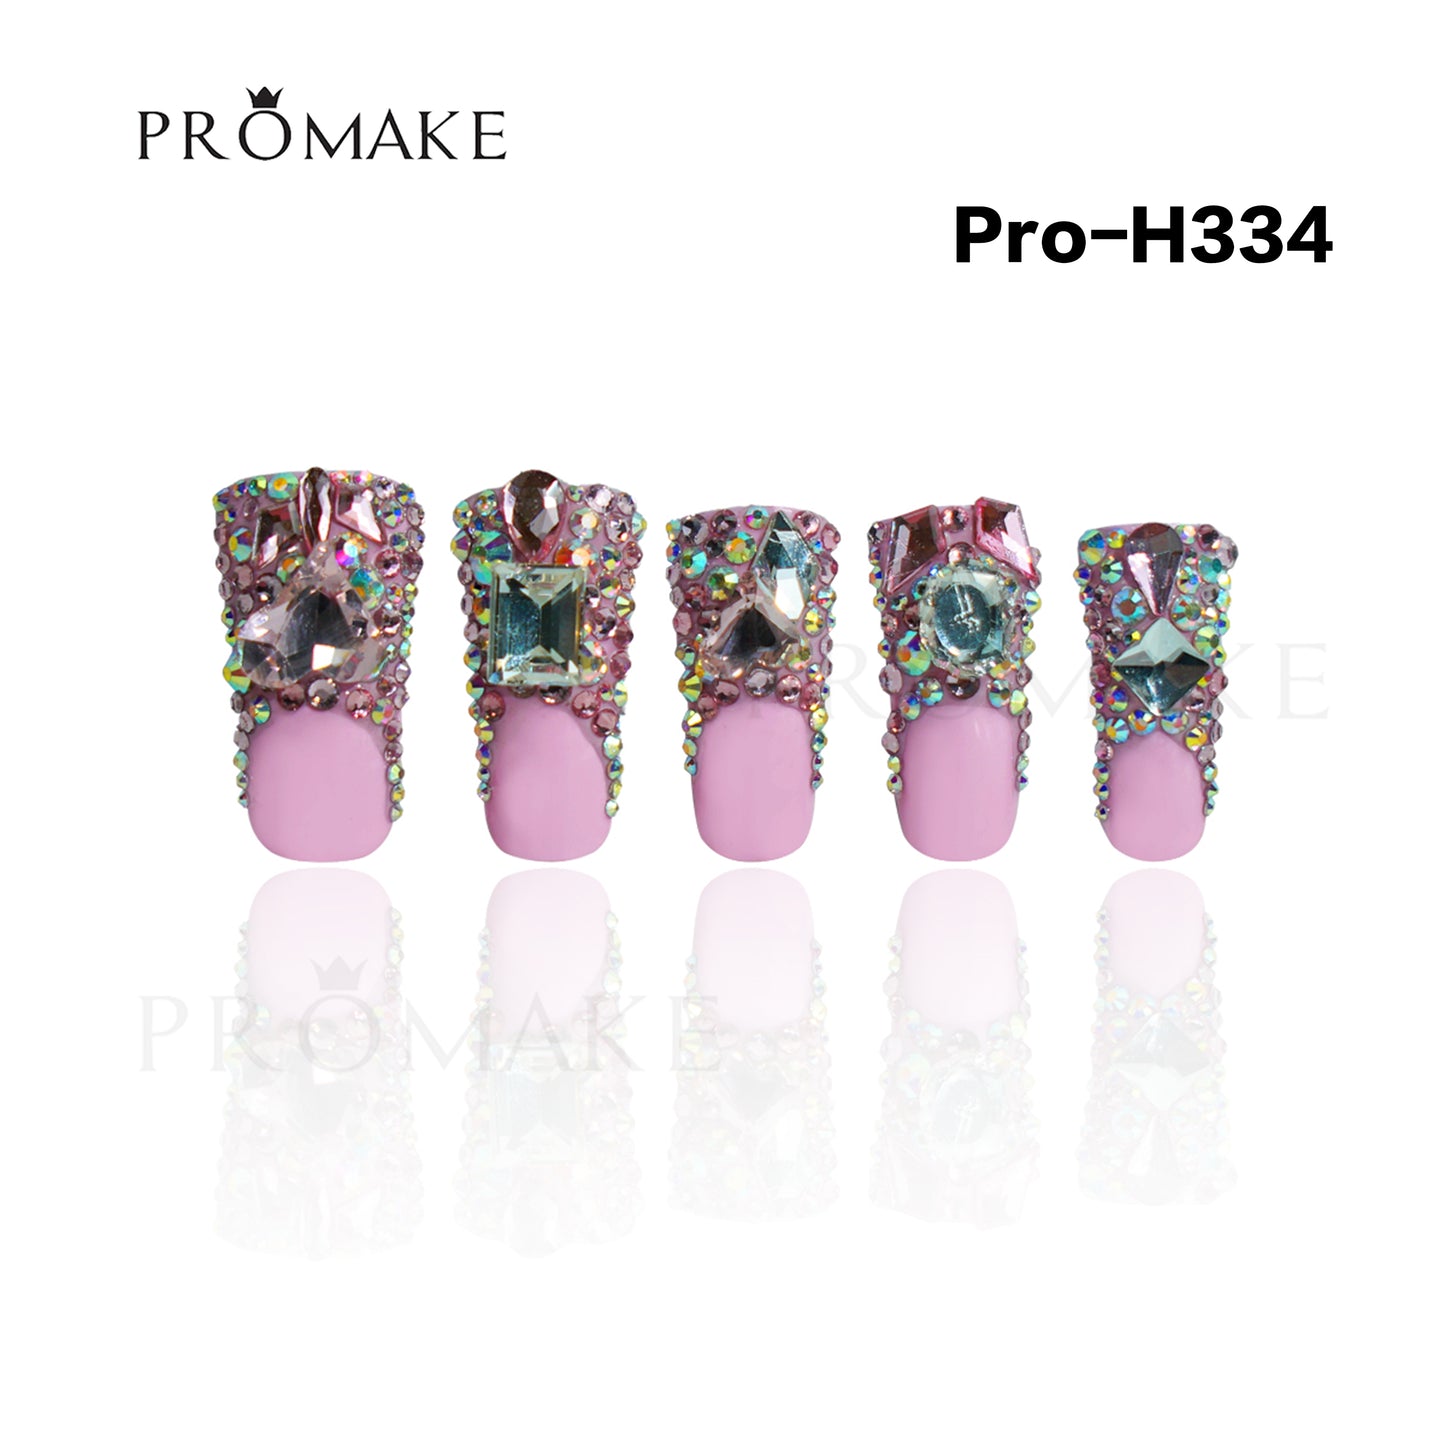 [New Arrival] Promake Luxury - DUCK TIPS - H331-H334 - Custom Handmade Press On Nails 10PCS Reuseable Nails wtih Nail tools